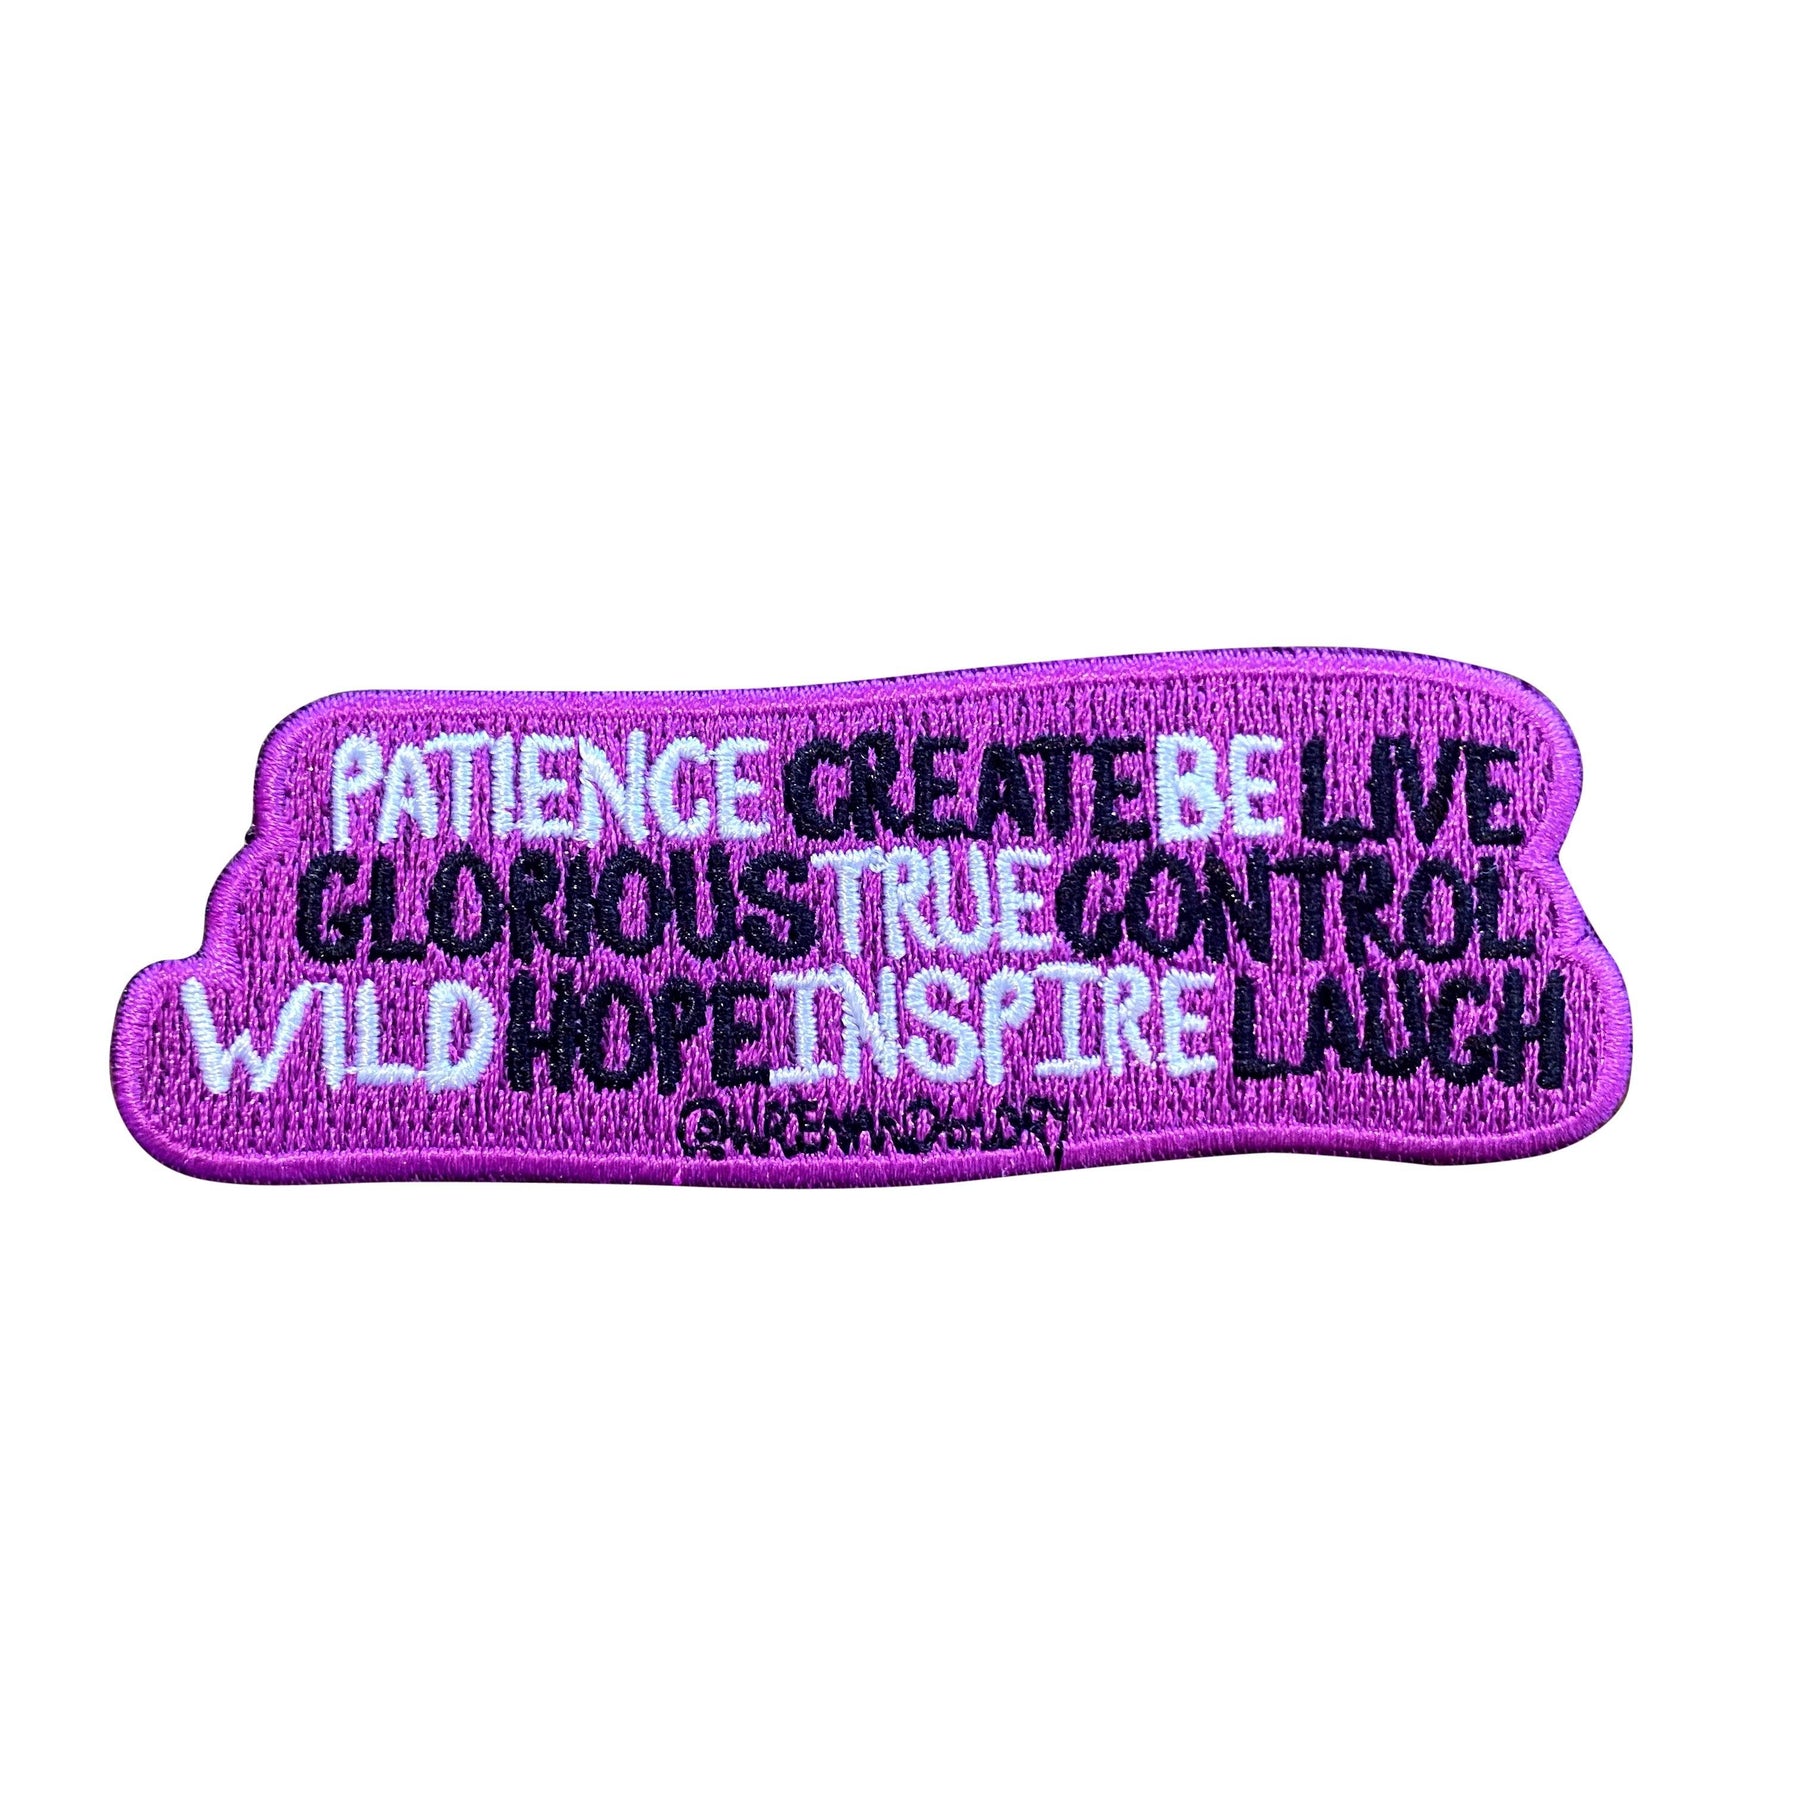 'POSITIVE VIBES' EMBROIDERED PATCH